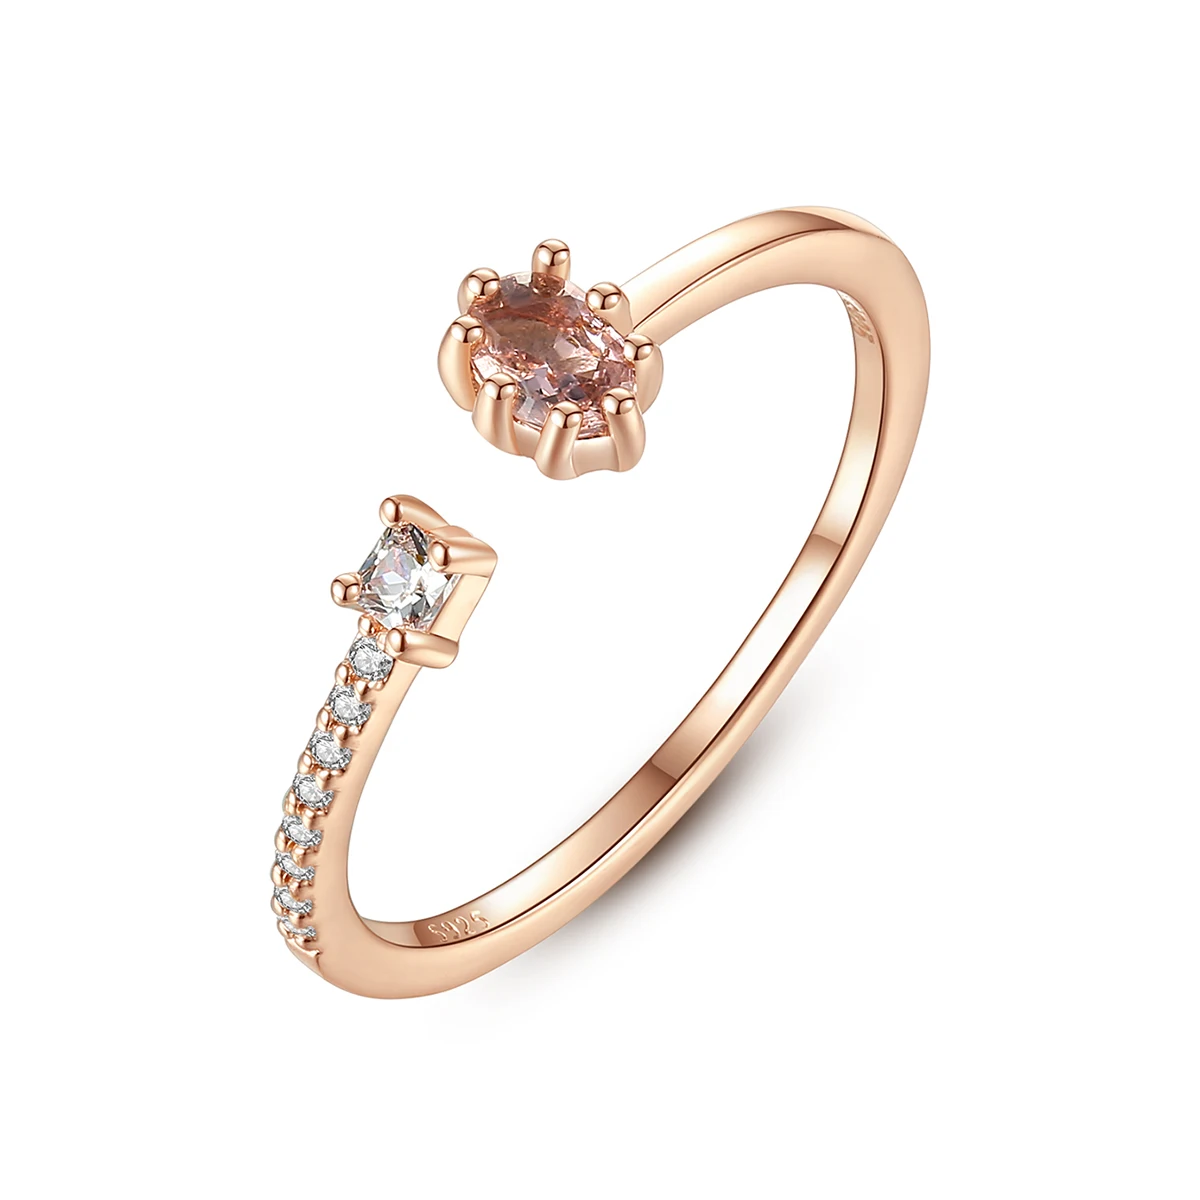 

CZCITY Sterling 925 Silver Adjustable Open Rose Gold Ring with CZ Stone Ring for Elegent Woman Girl Gift